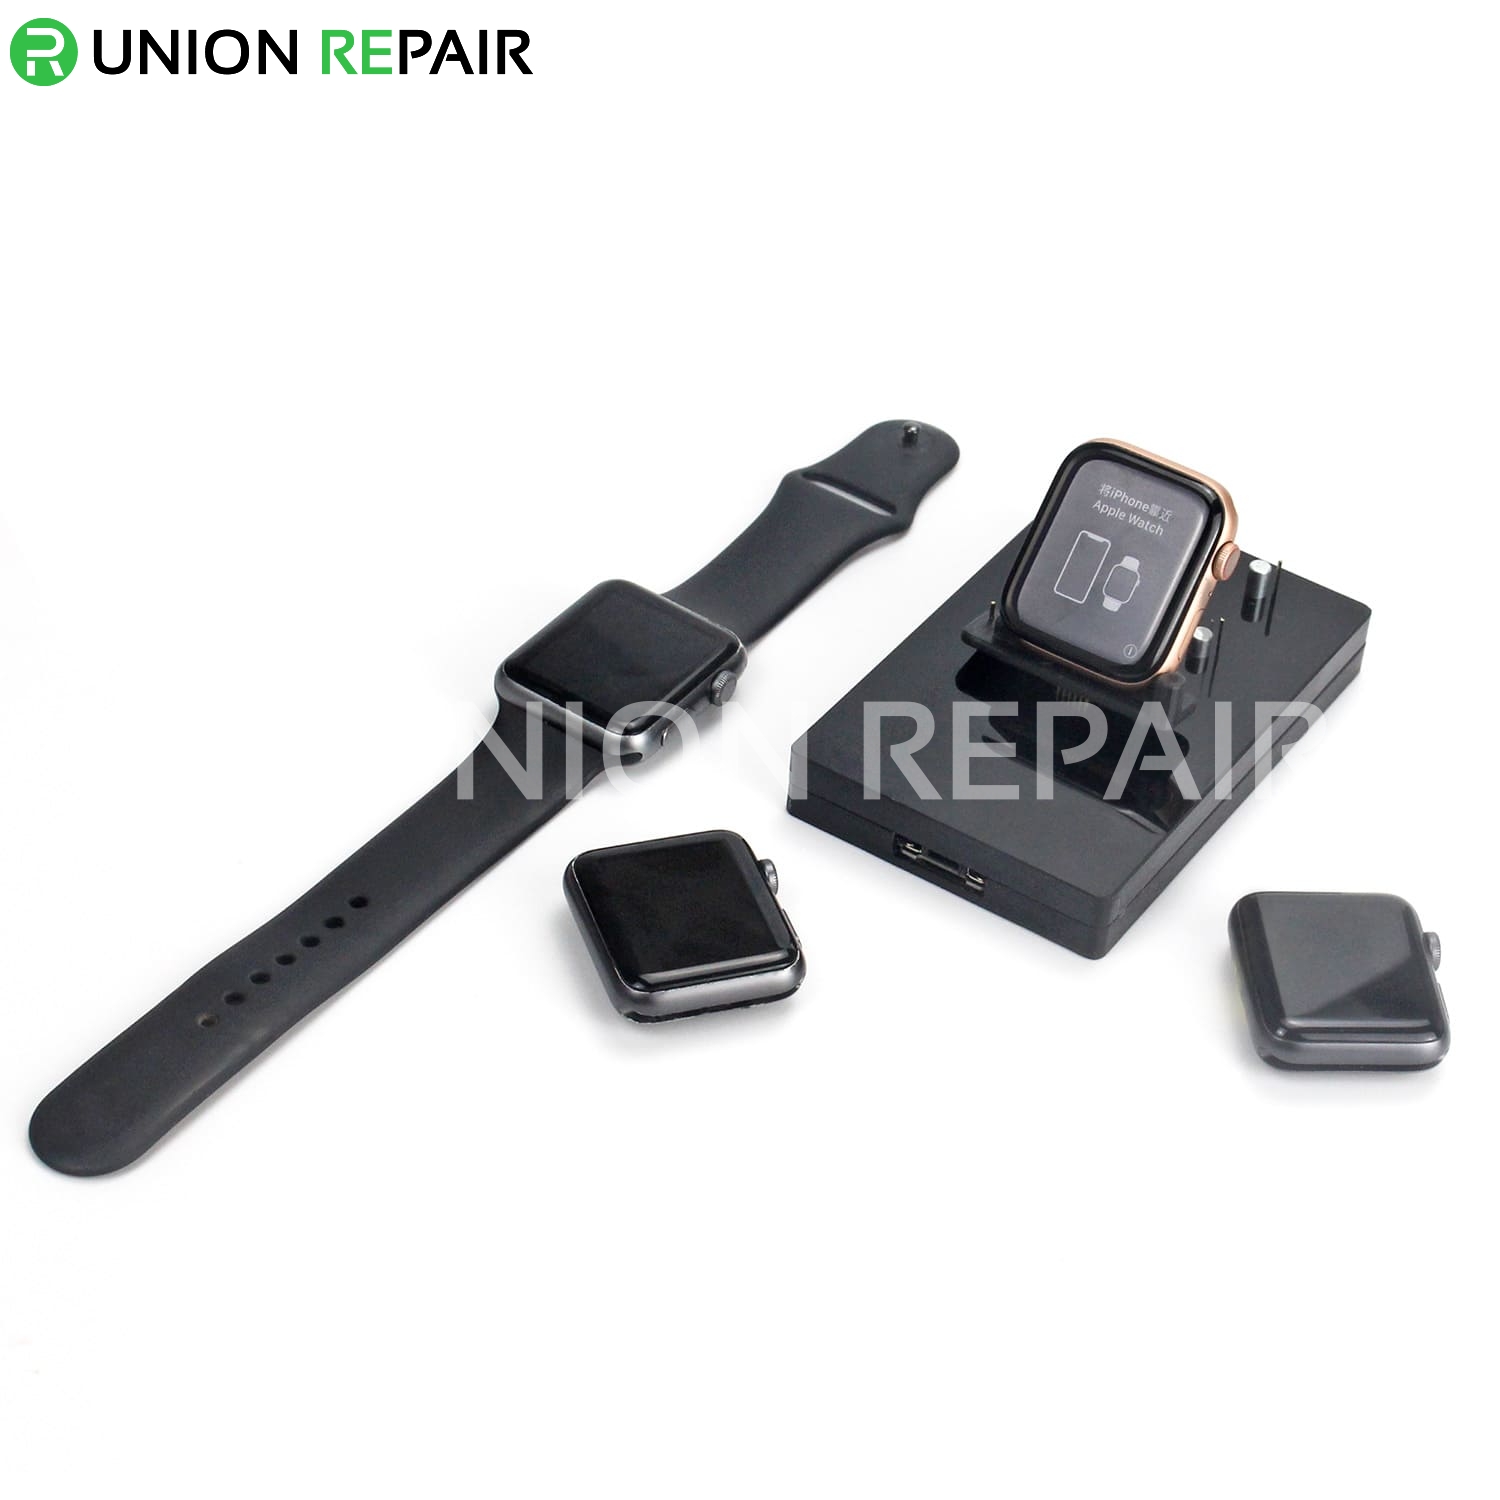 iBus AWRT Adapter Restore Tool for iWatch S1/S2/S3/S4/S5/S6 RecoveryiBus AWRT Adapter Restore Tool for iWatch S1/S2/S3/S4/S5/S6 Recovery